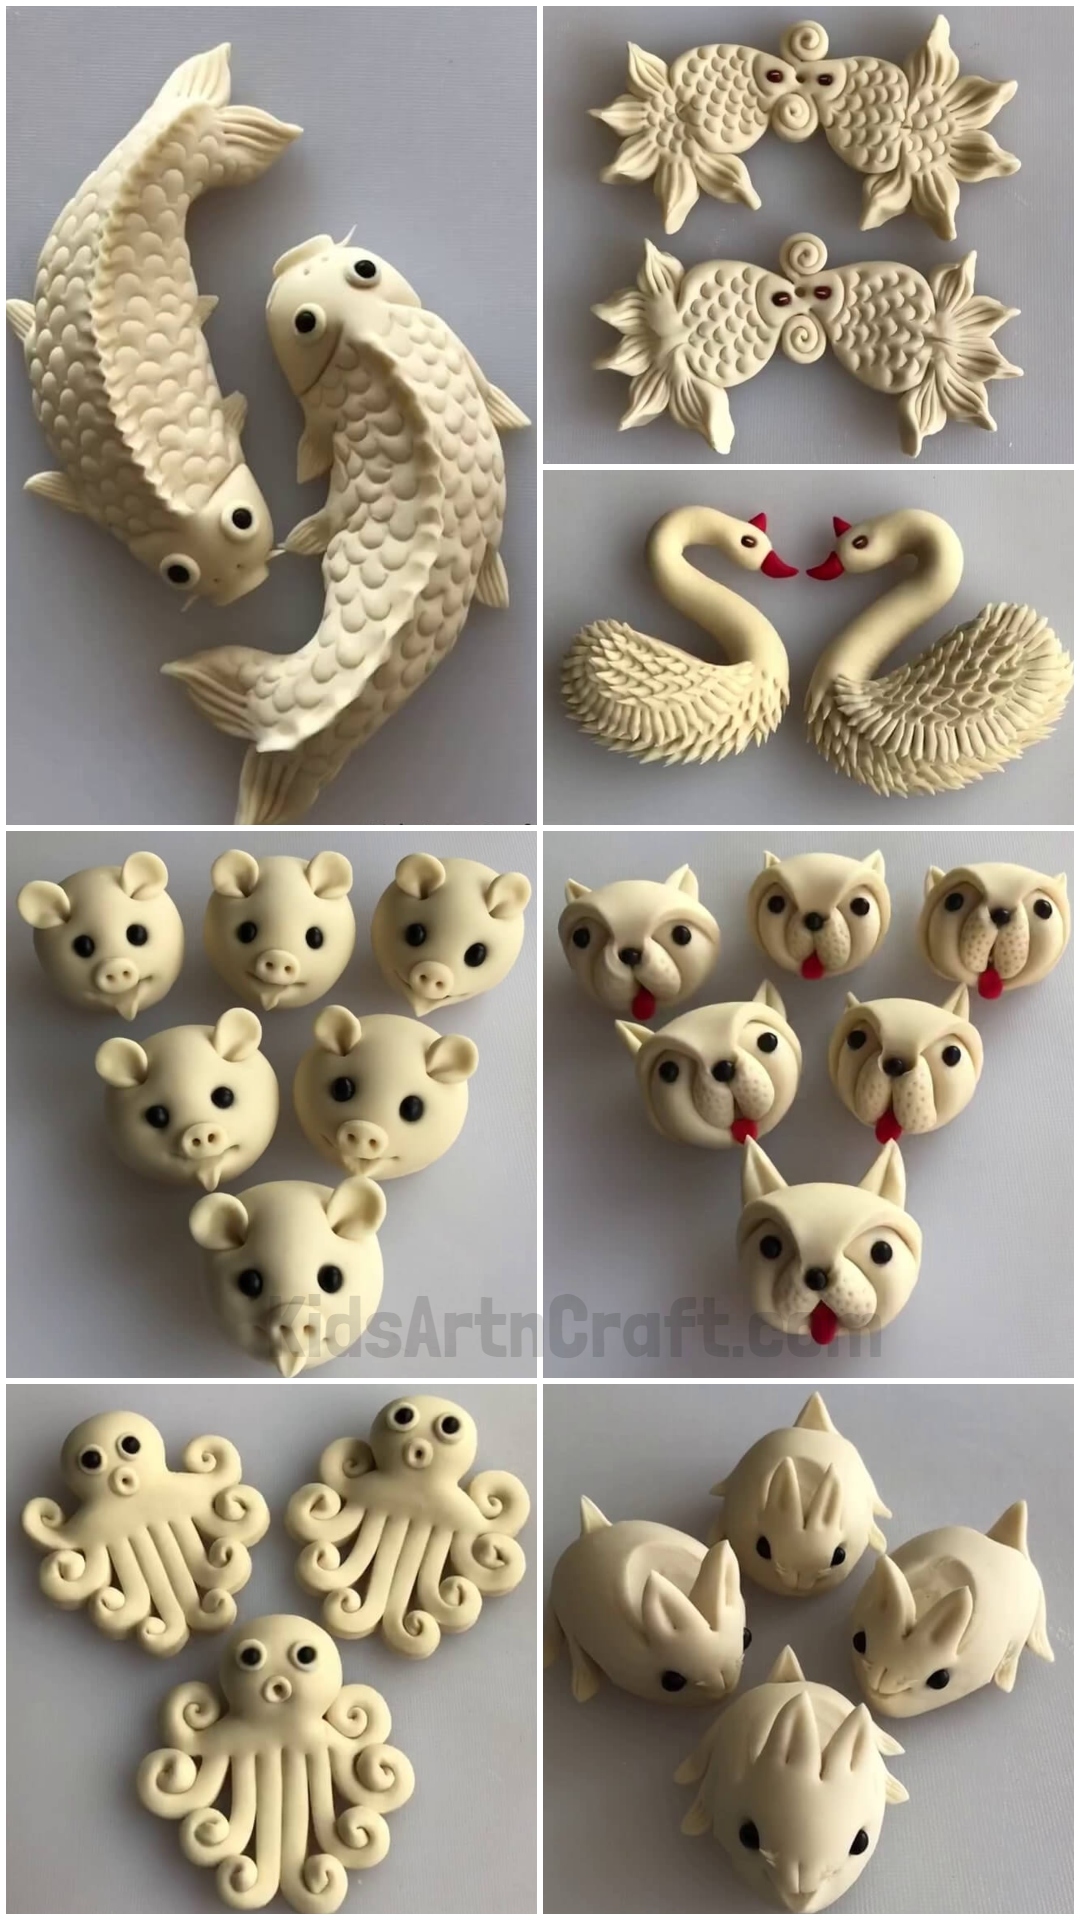 White Clay Craft Ideas at Home